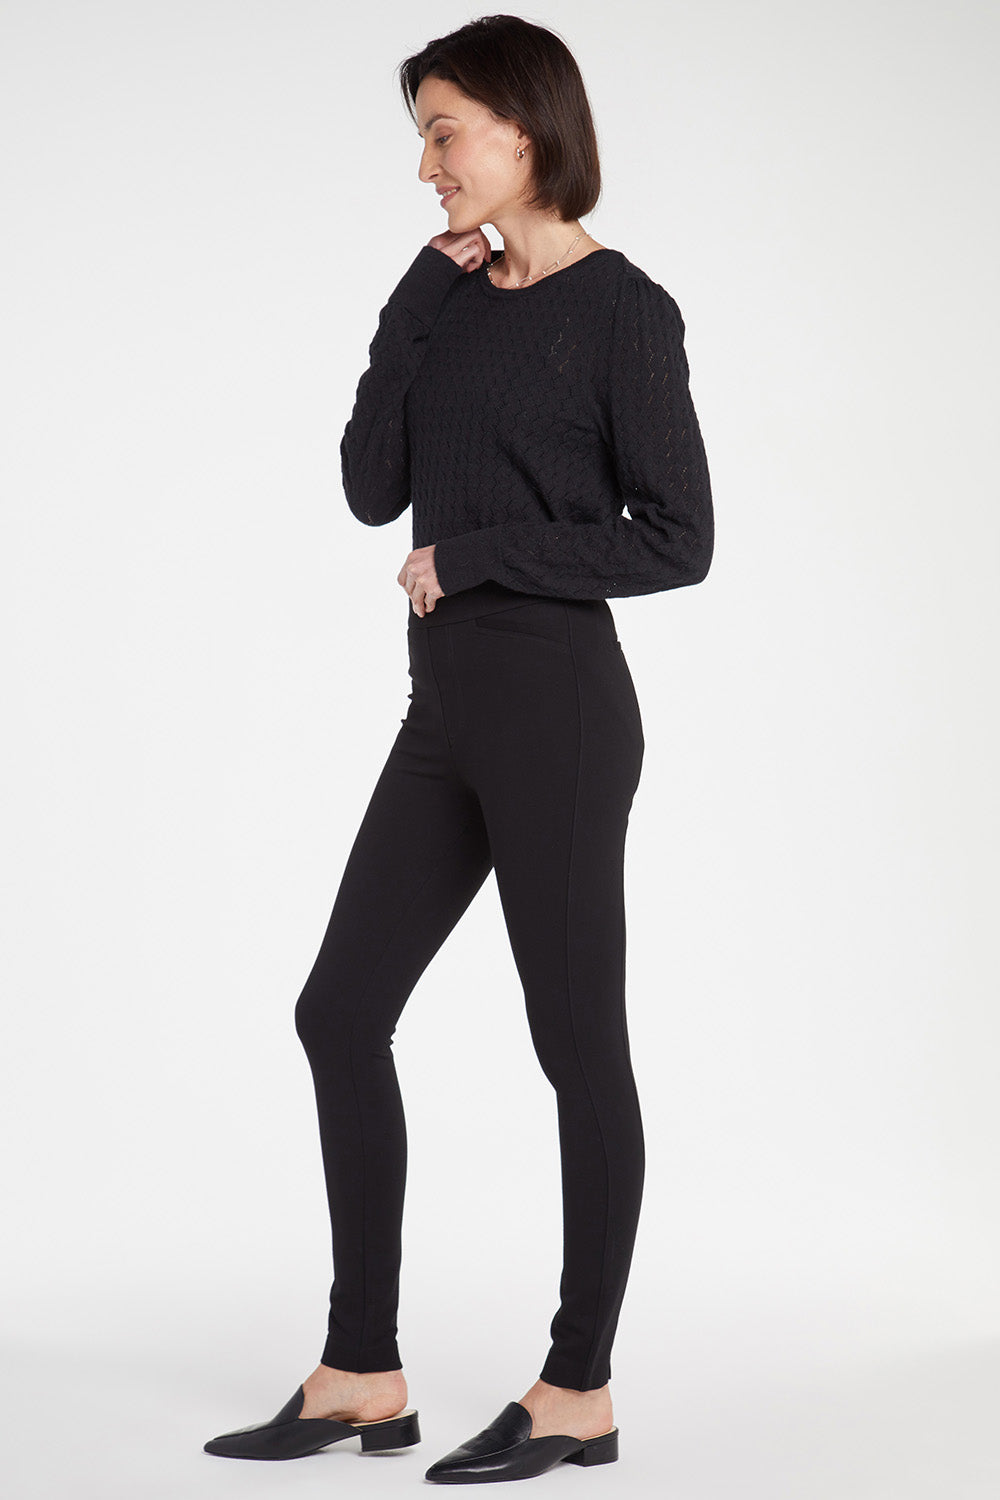 NYDJ Pull-On Legging Pants Sculpt-Her™ Collection - Black